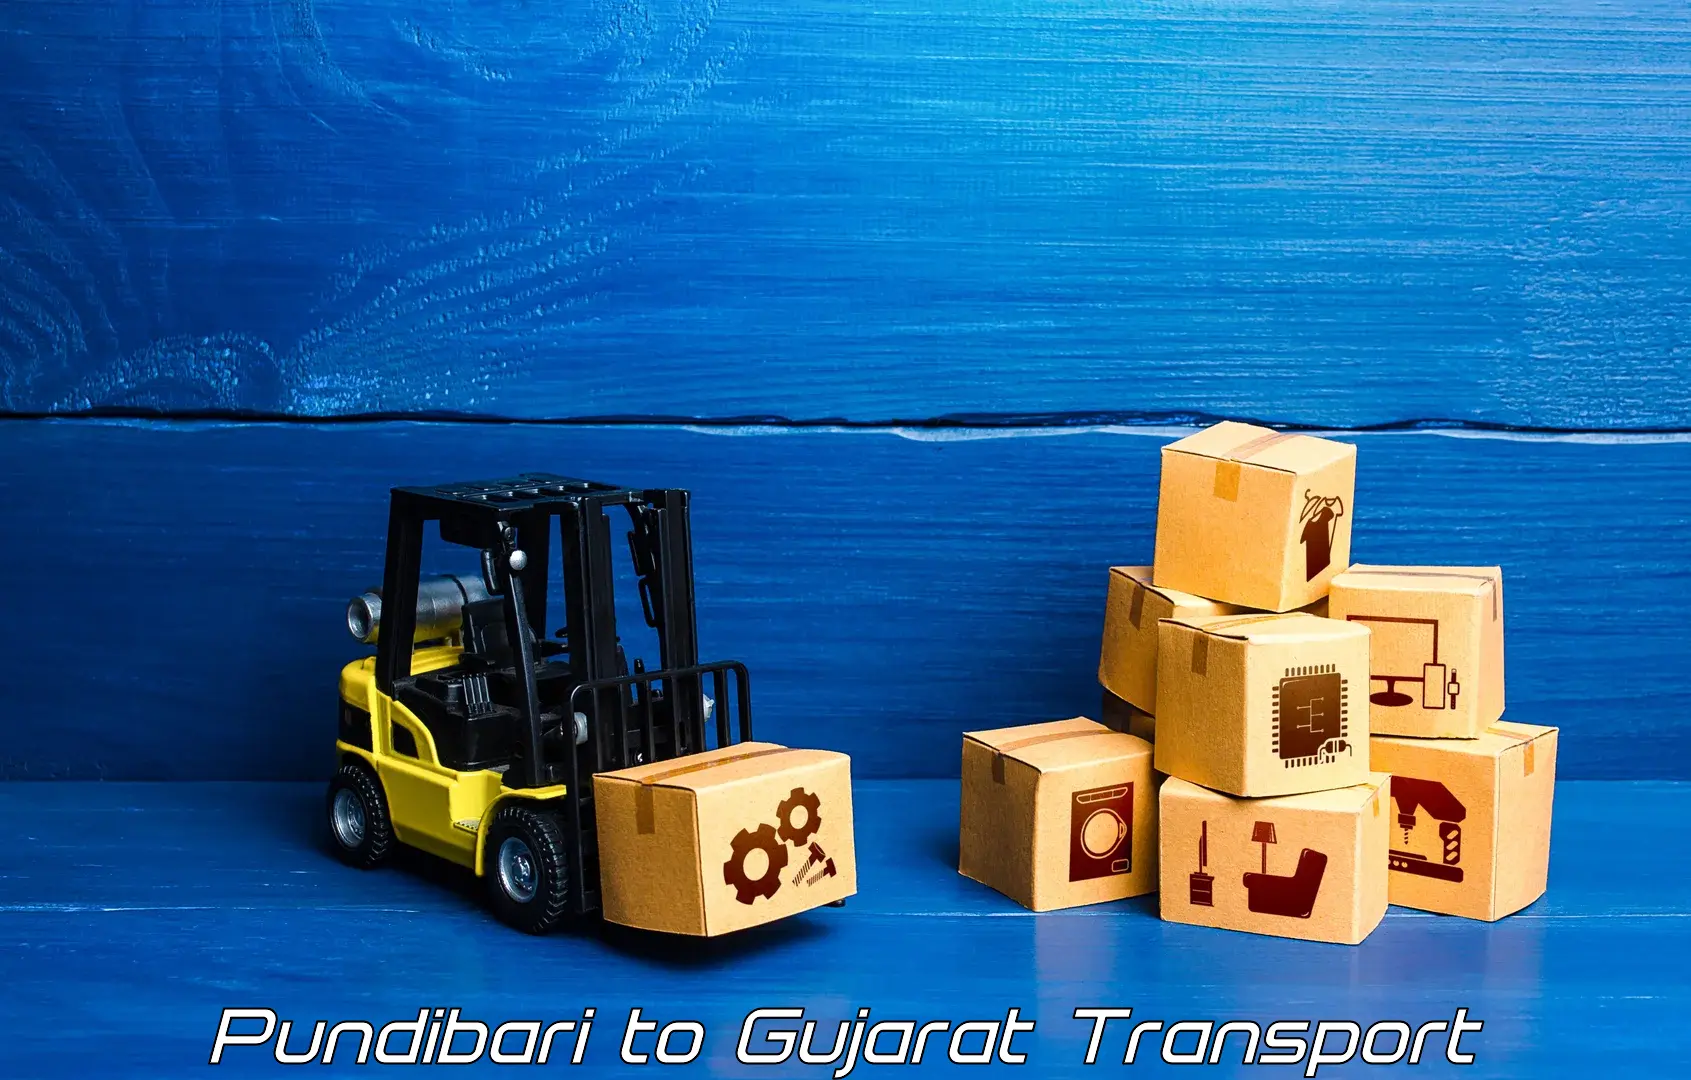 Transport bike from one state to another Pundibari to Gujarat